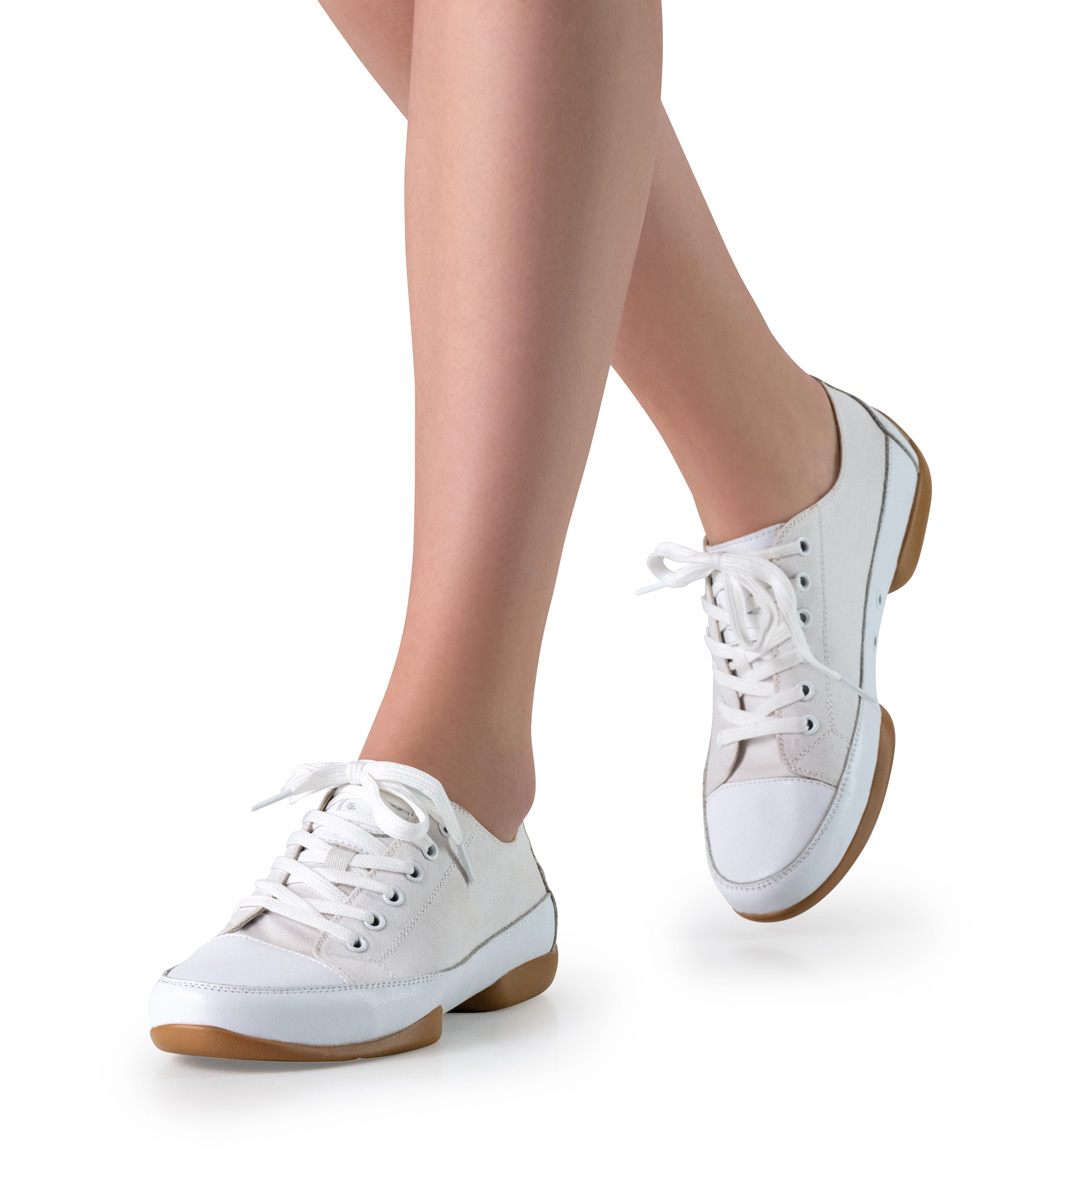 Suny dance sneakers for women in leather and canvas